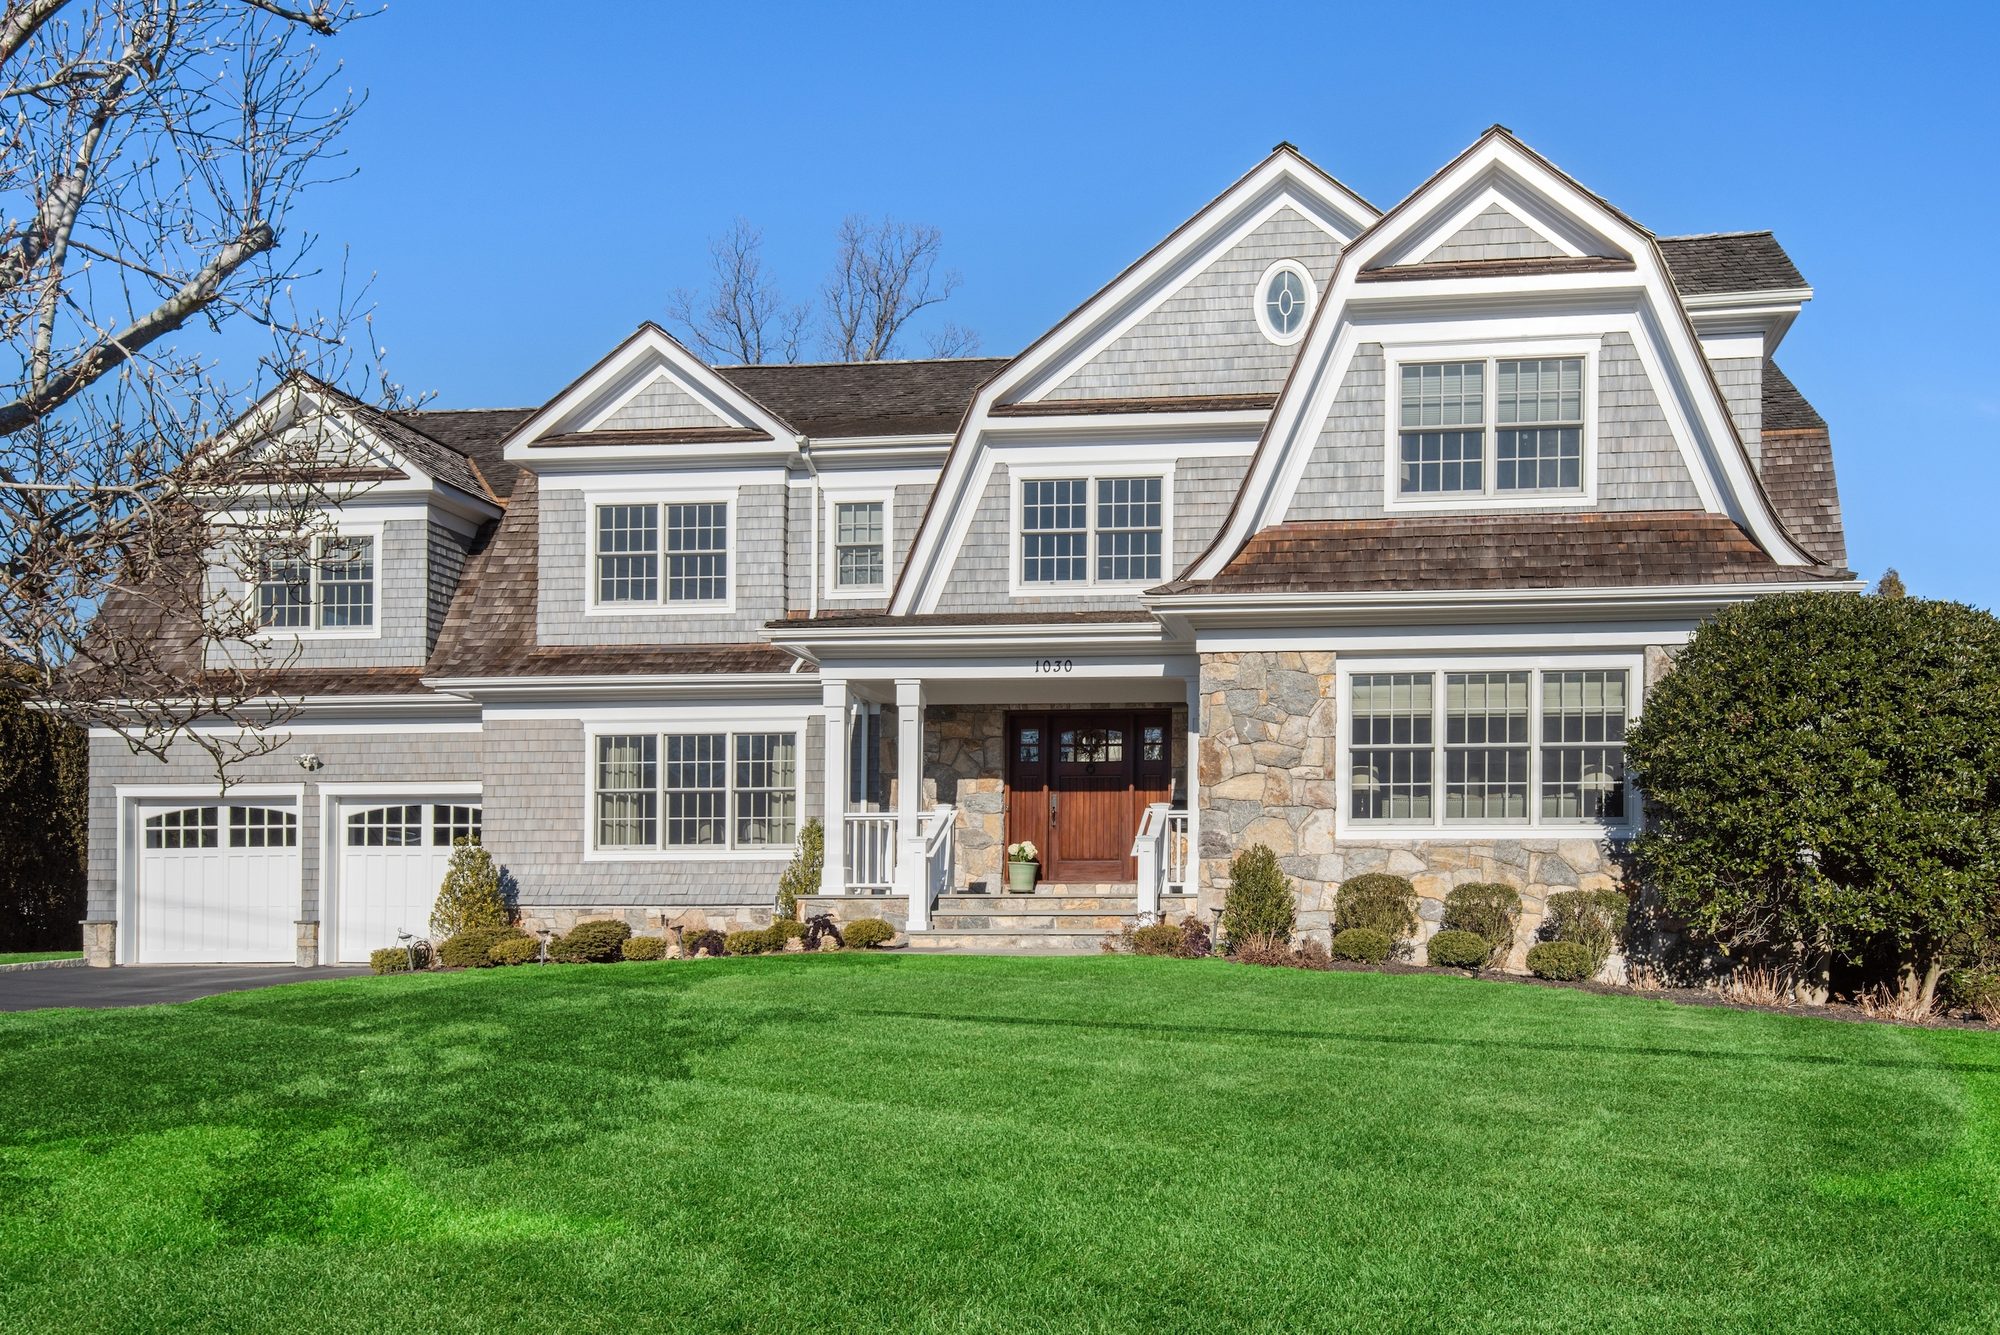 Stunning custom built home with pale gray blue siding and a real wood front door. White garage doors with lots of white trim. Real stone veneer.